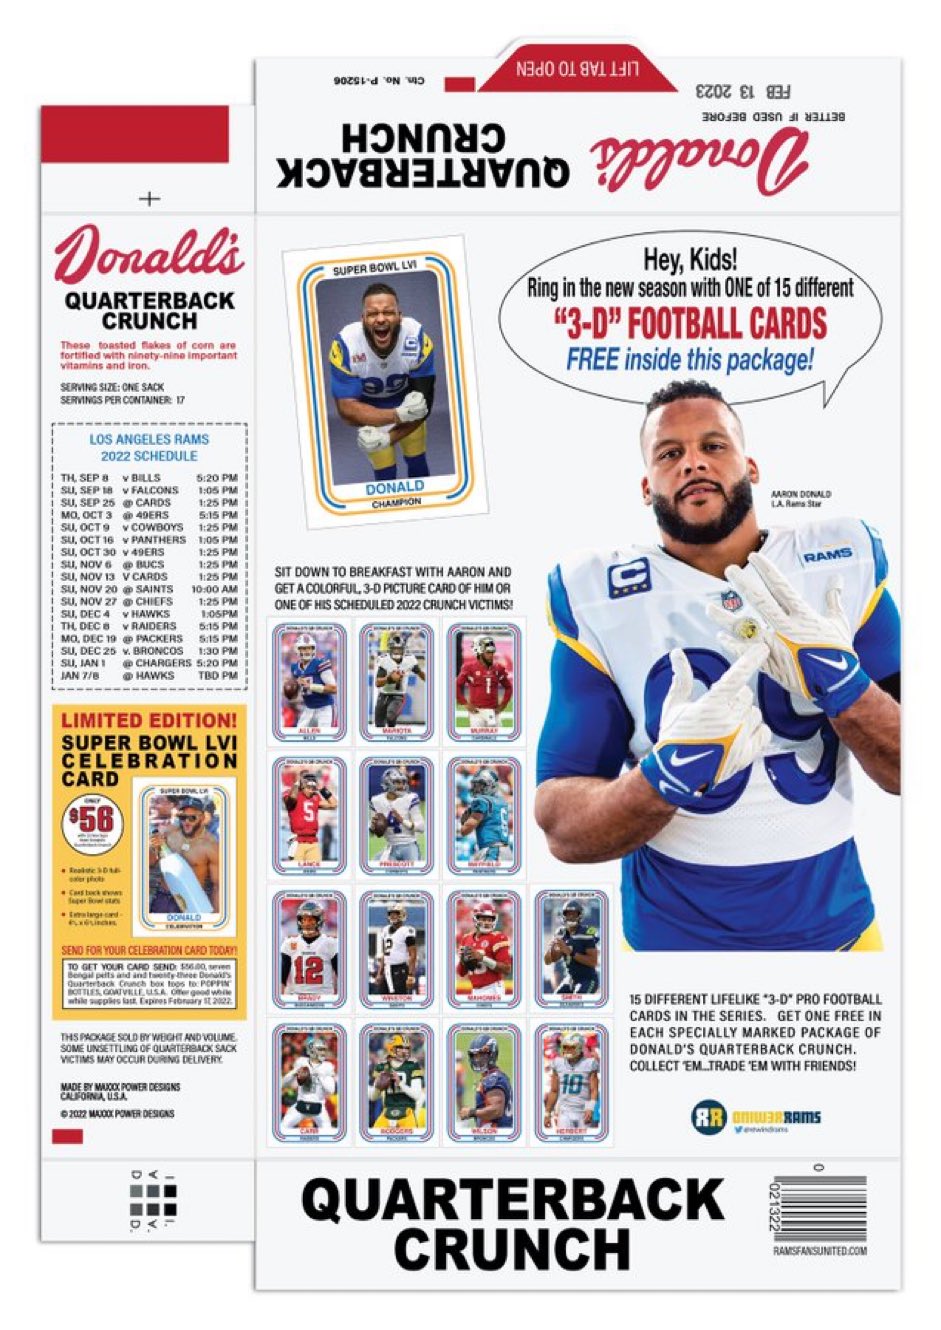 Happy Birthday to perhaps the greatest defensive player in NFL history, Aaron Donald. 